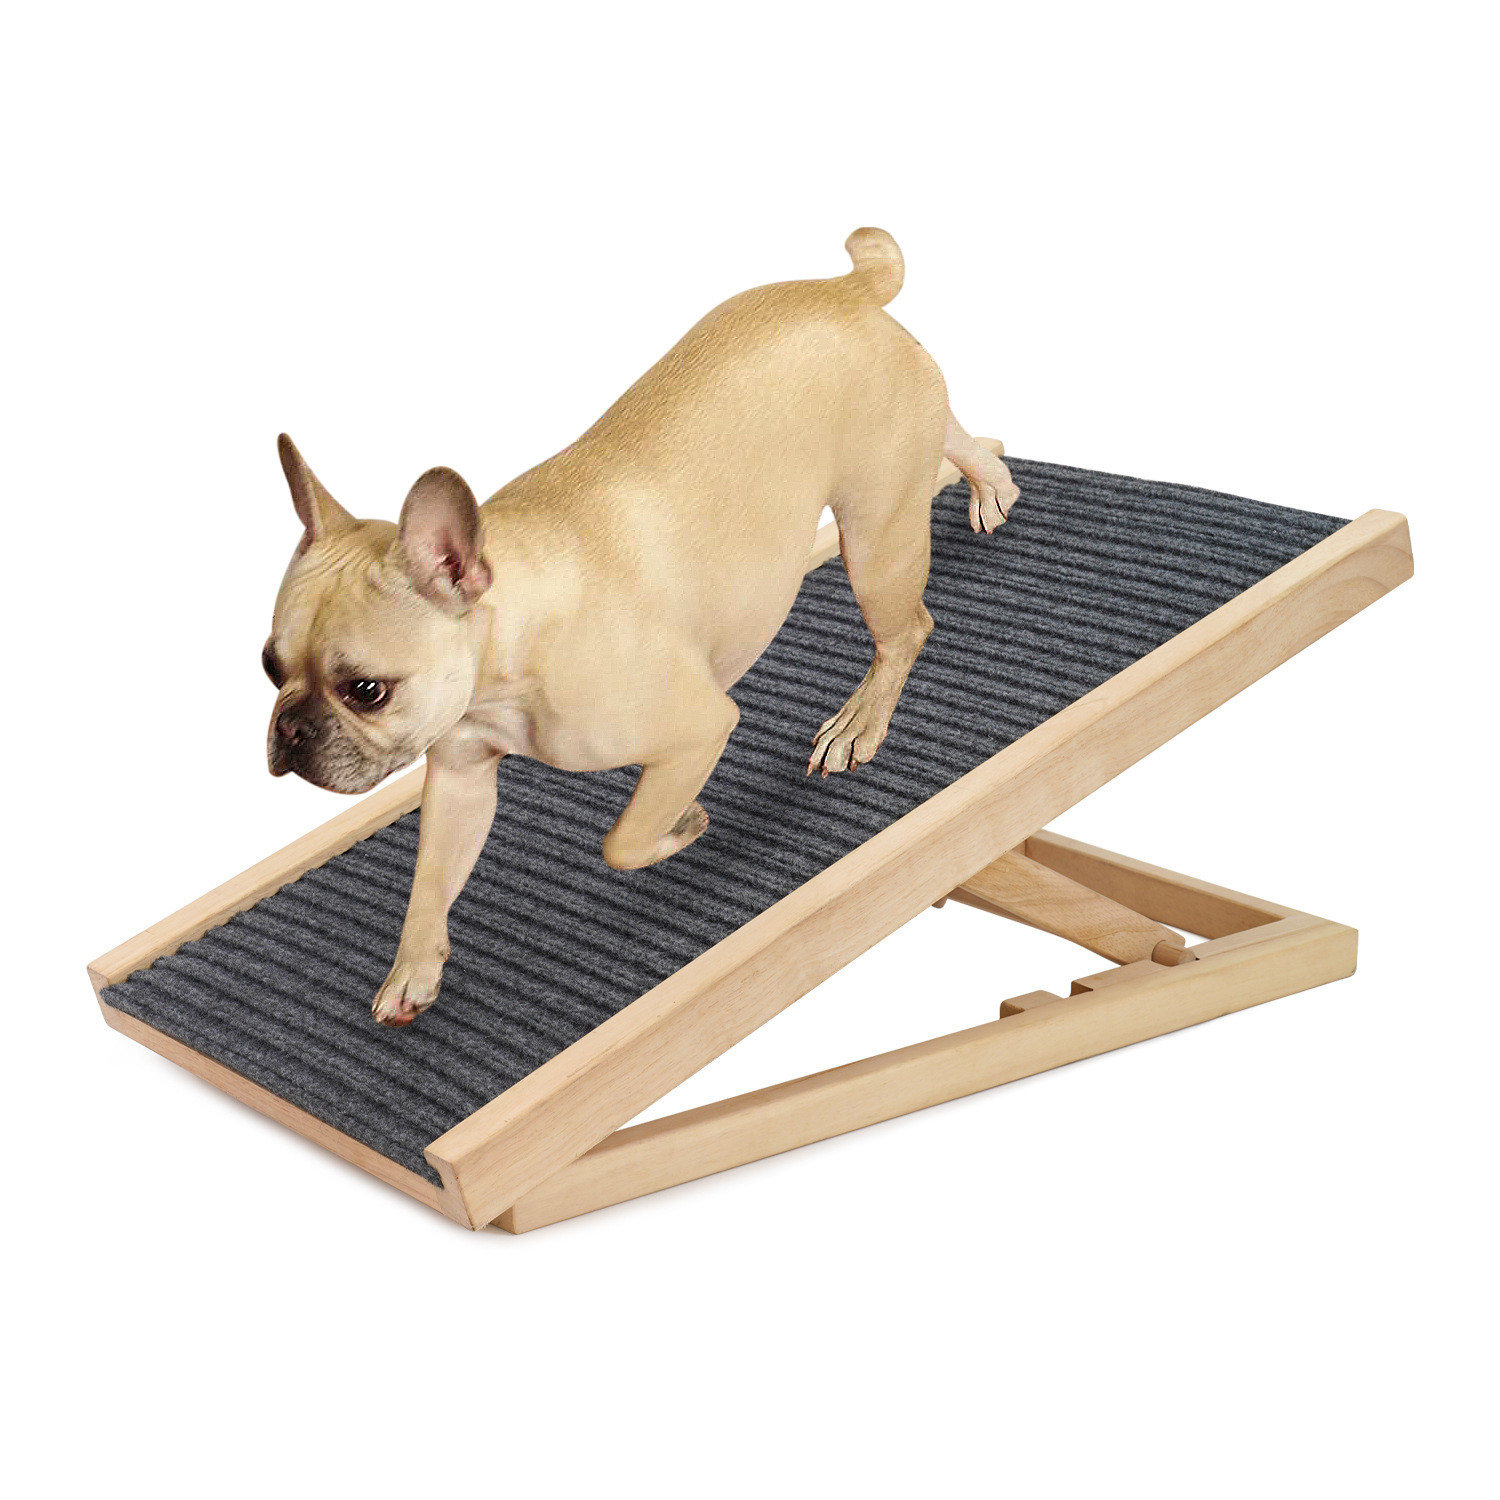  Couch Wooden 36 Inch Dog Ramp 6kg Adjustable Height Dog Ramp Manufactures